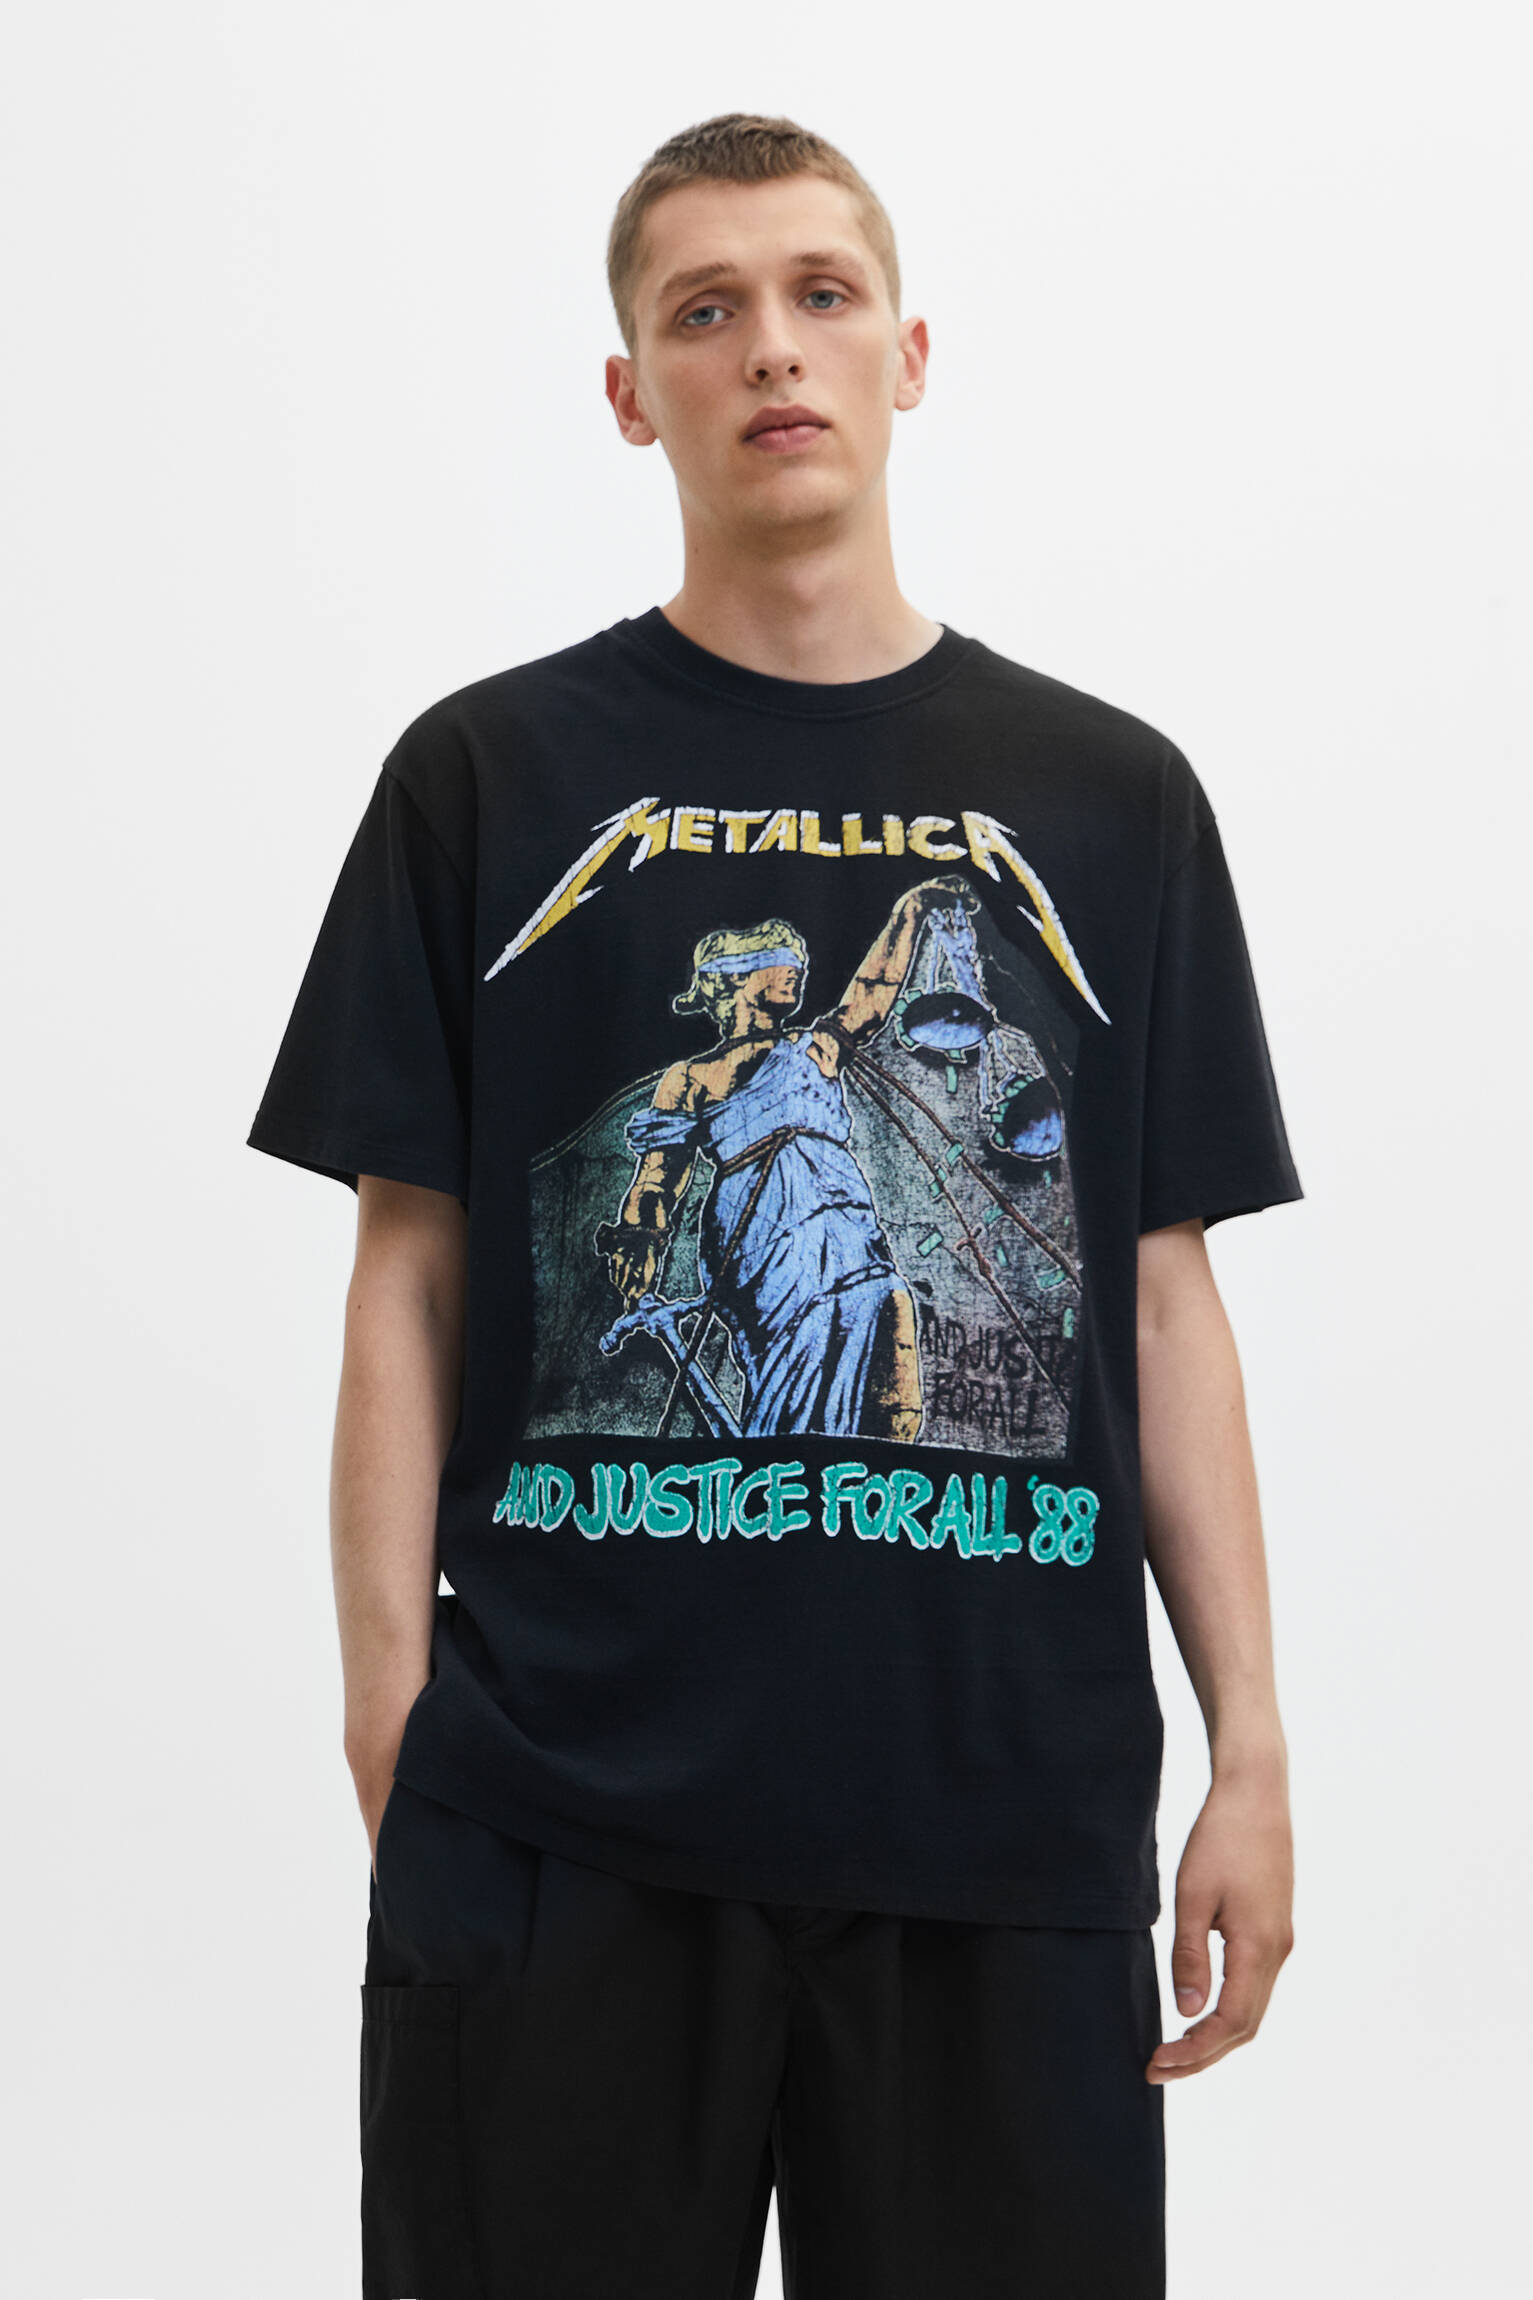 puente lavar Mejor Pull & Bear - Metallica And Justice for All T-shirt